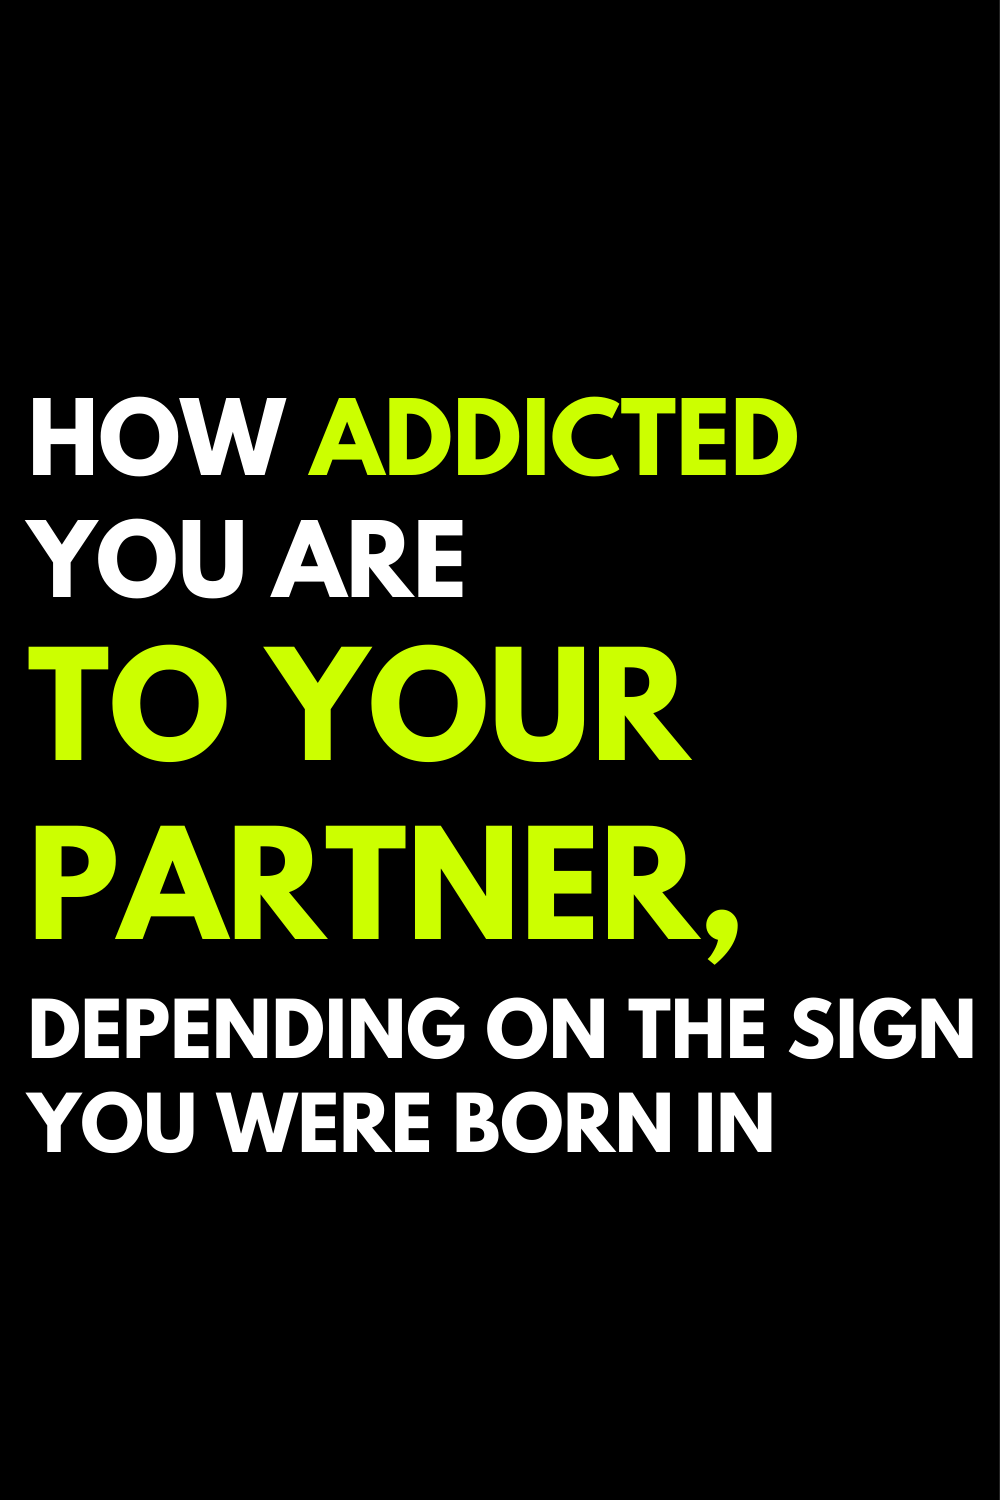 How addicted you are to your partner, depending on the sign you were born in